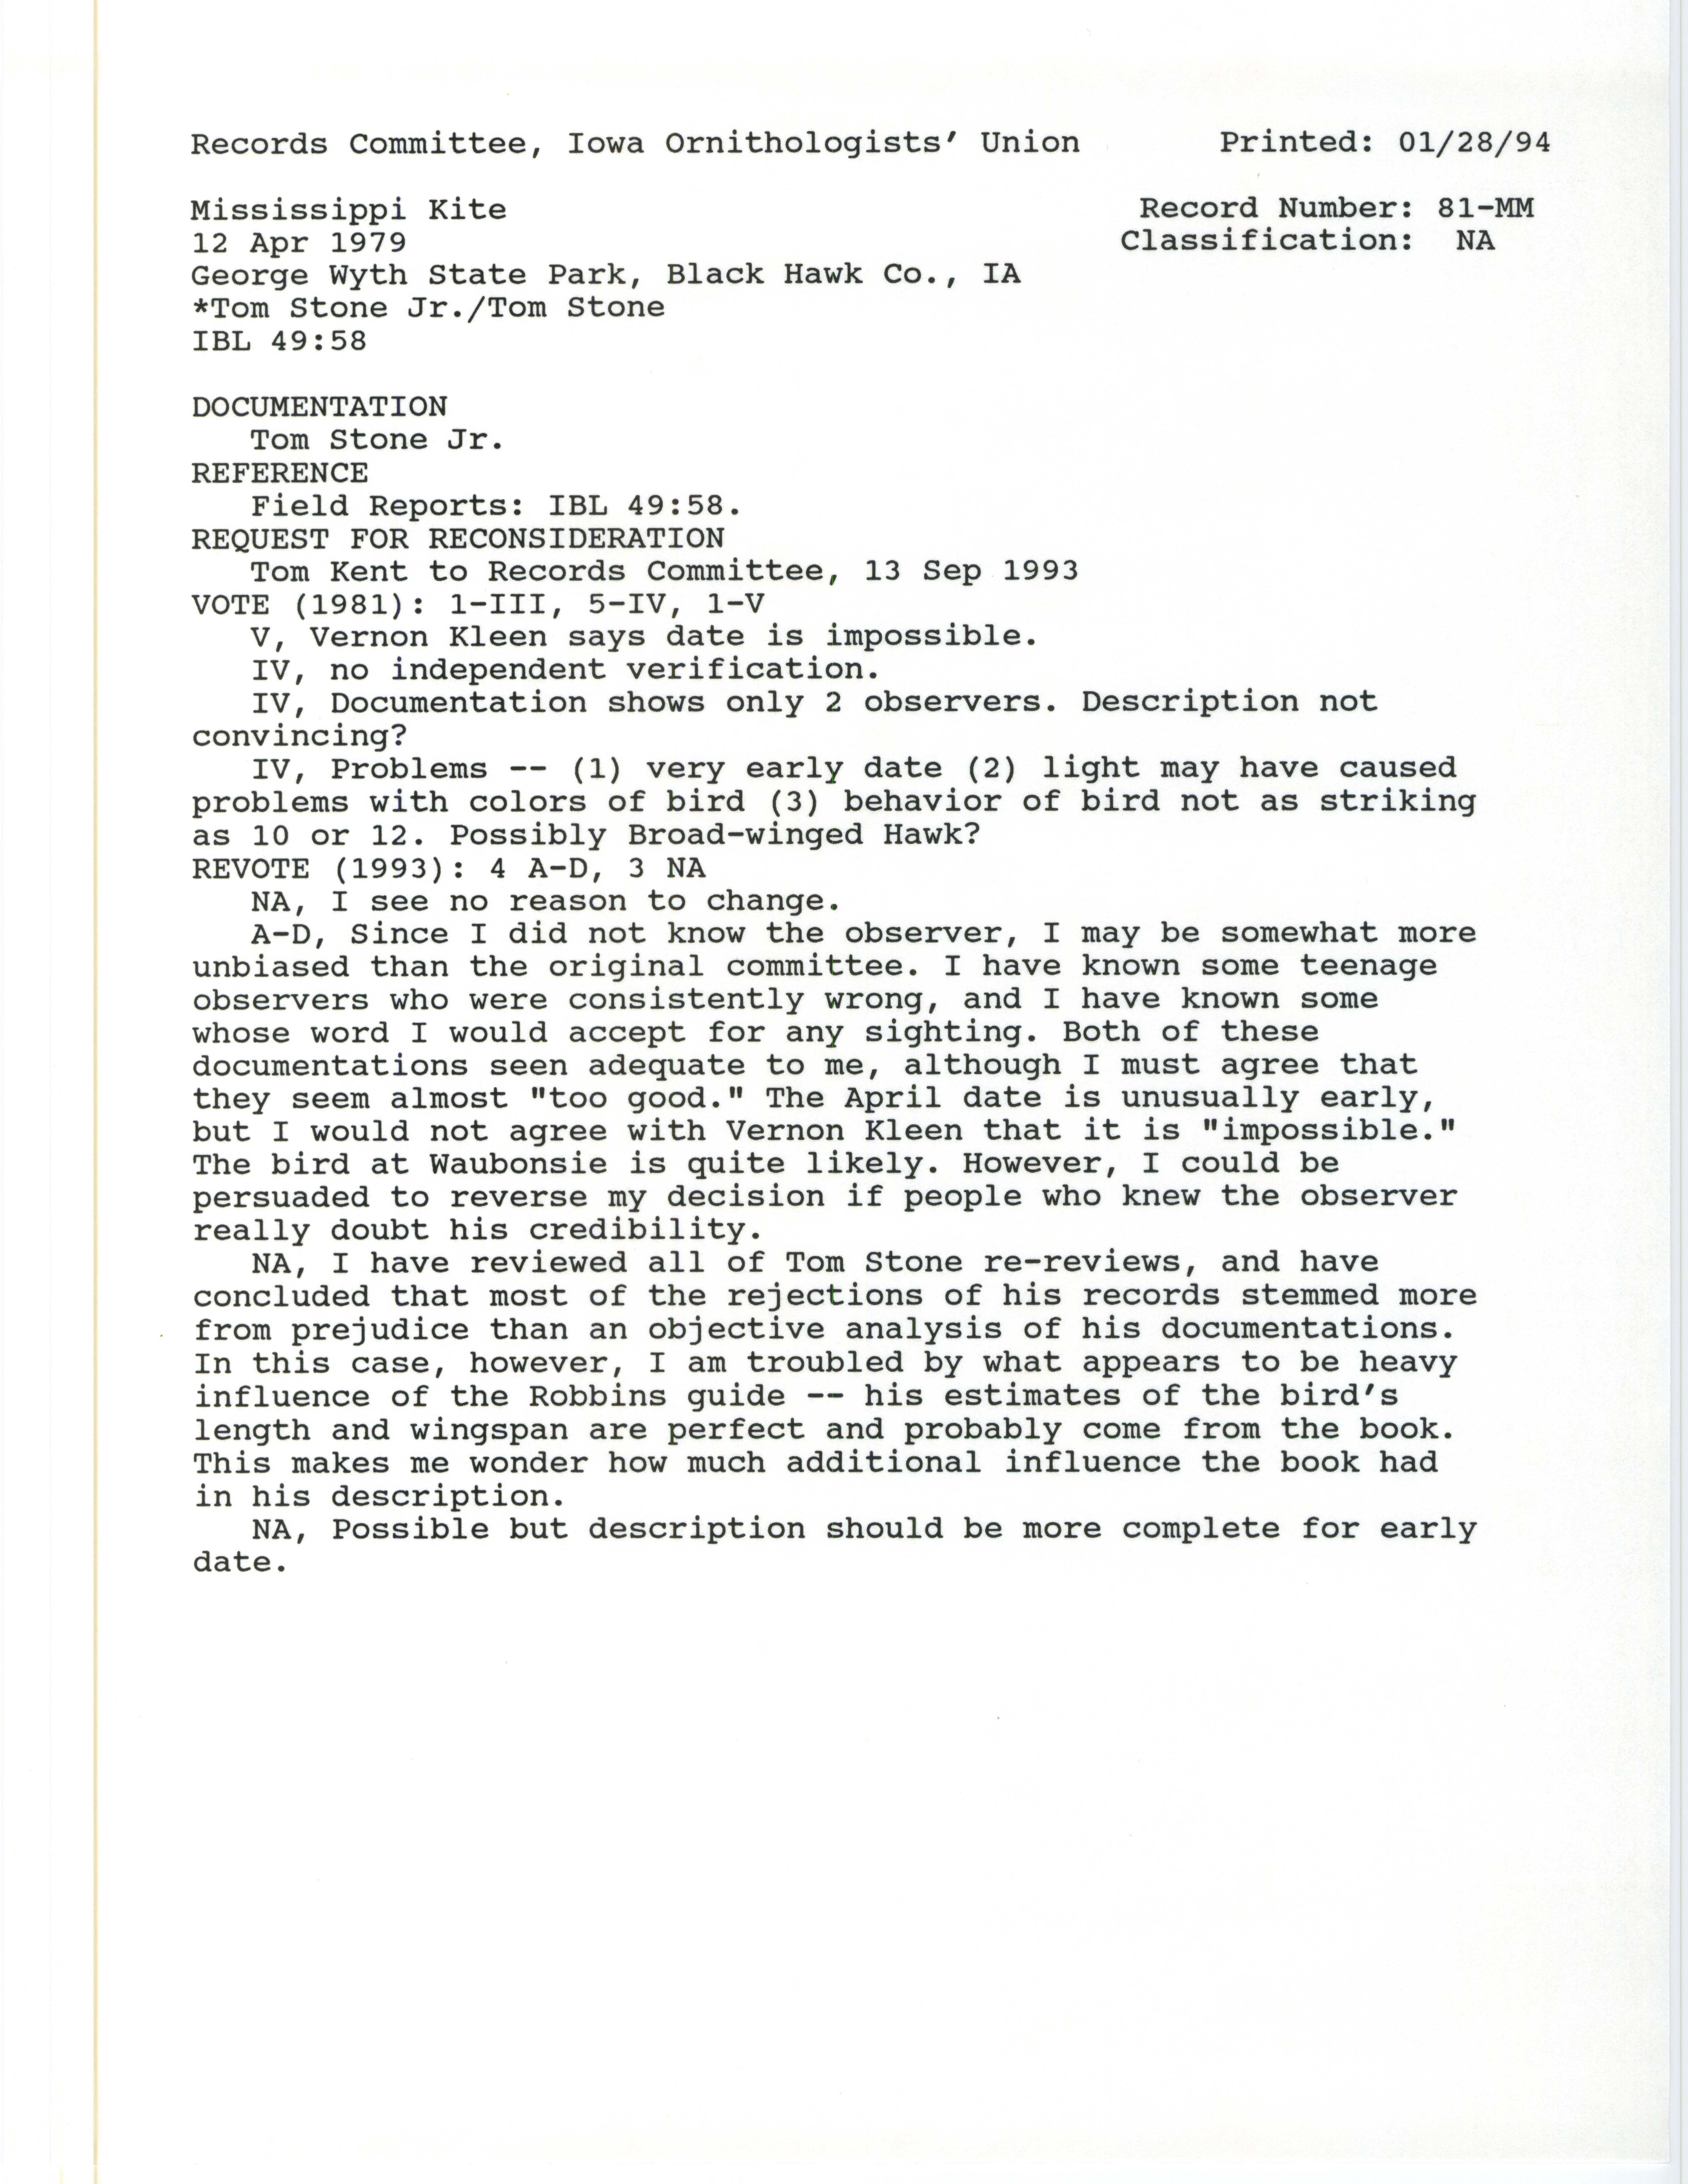 Records Committee review for rare bird sighting of Mississippi Kite at George Wyth State Park, 1979